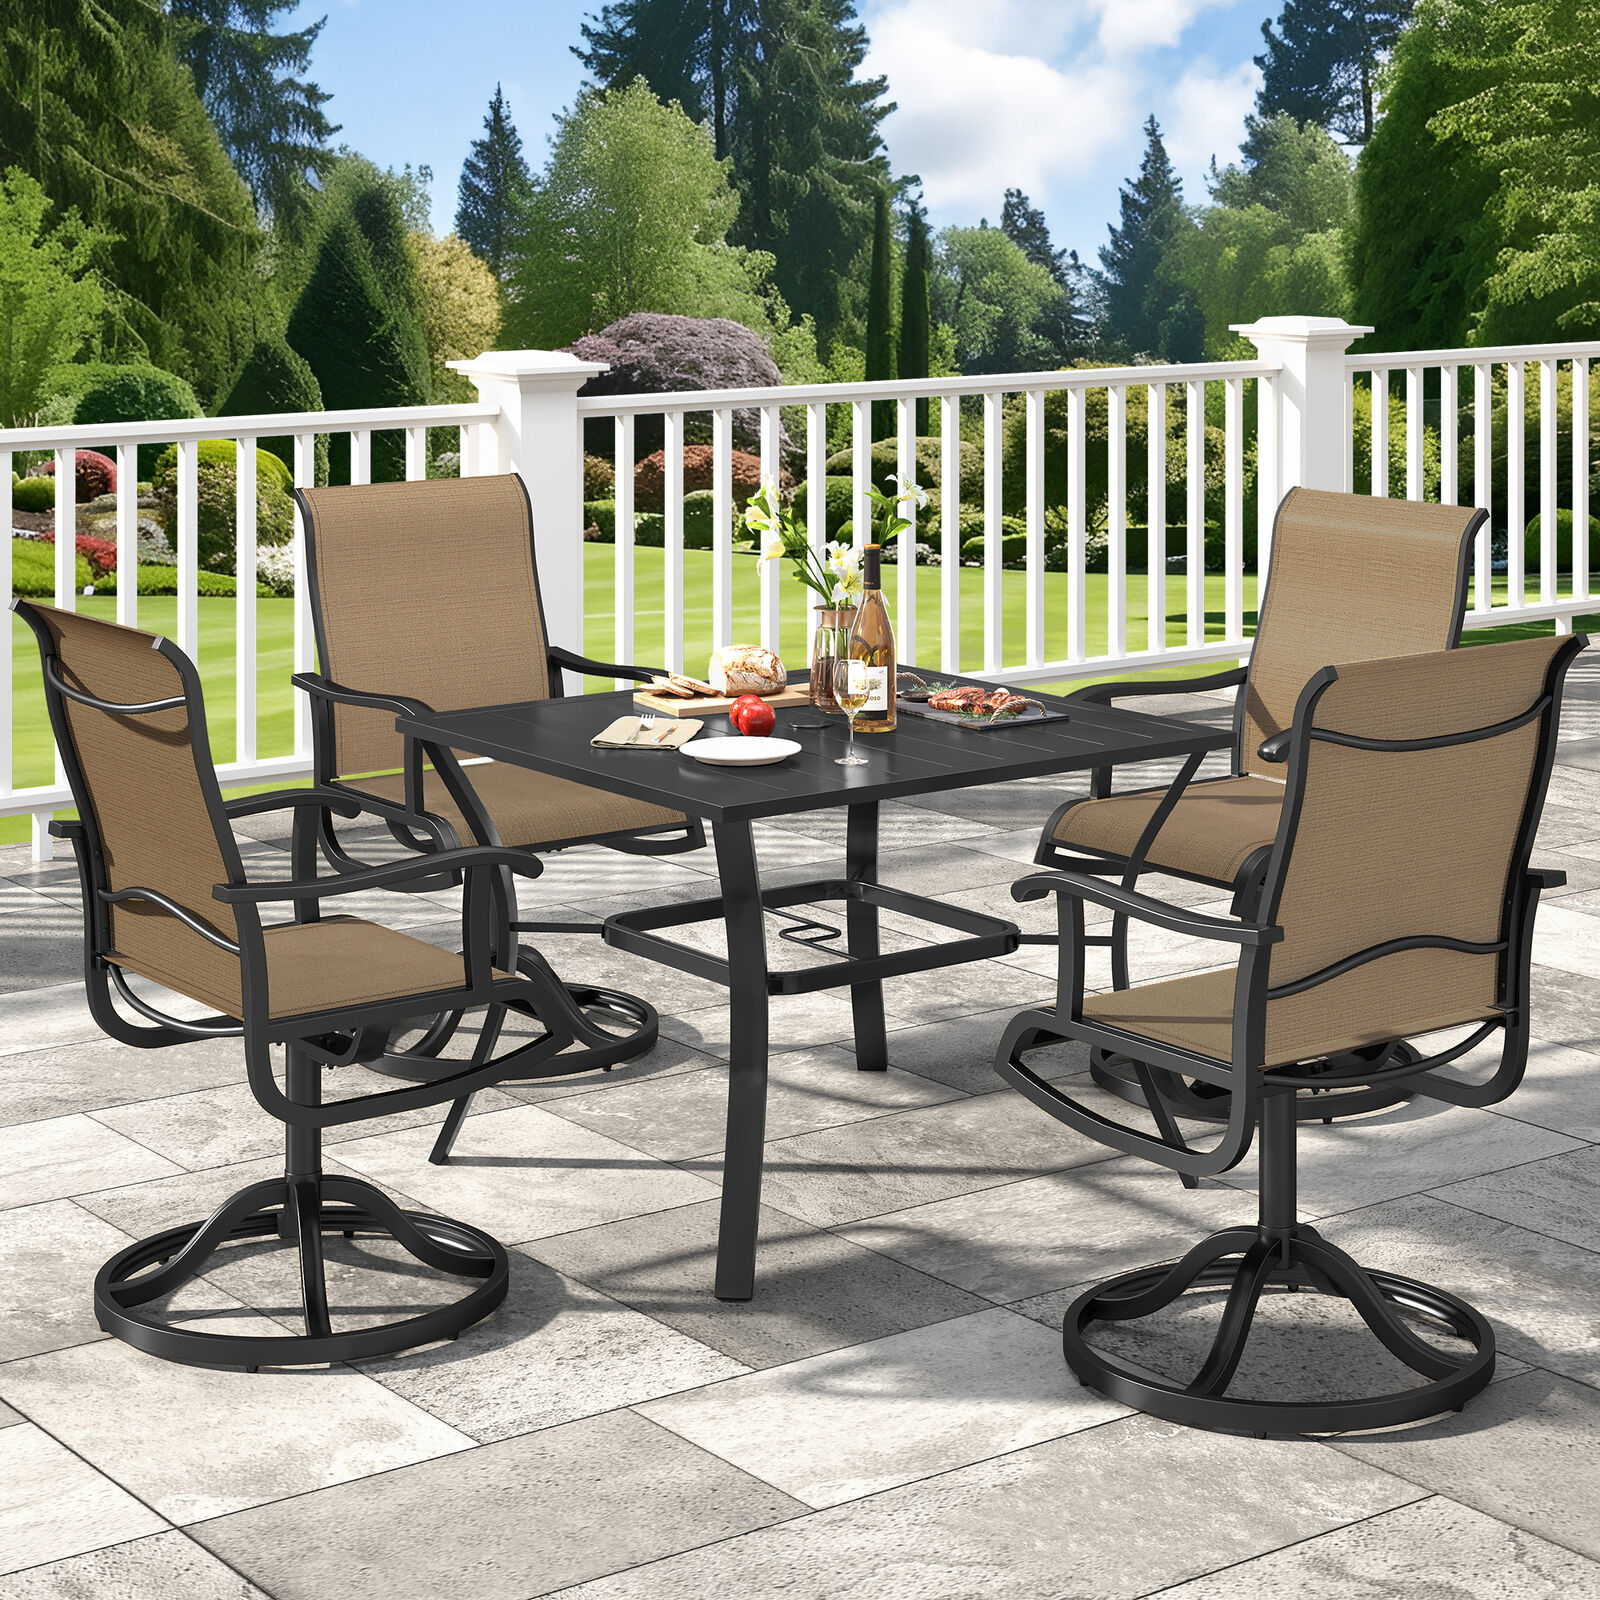 TAUS 5pcs Patio Dining Set Metal Square Table&Swivel Chair Outdoor Furniture Set